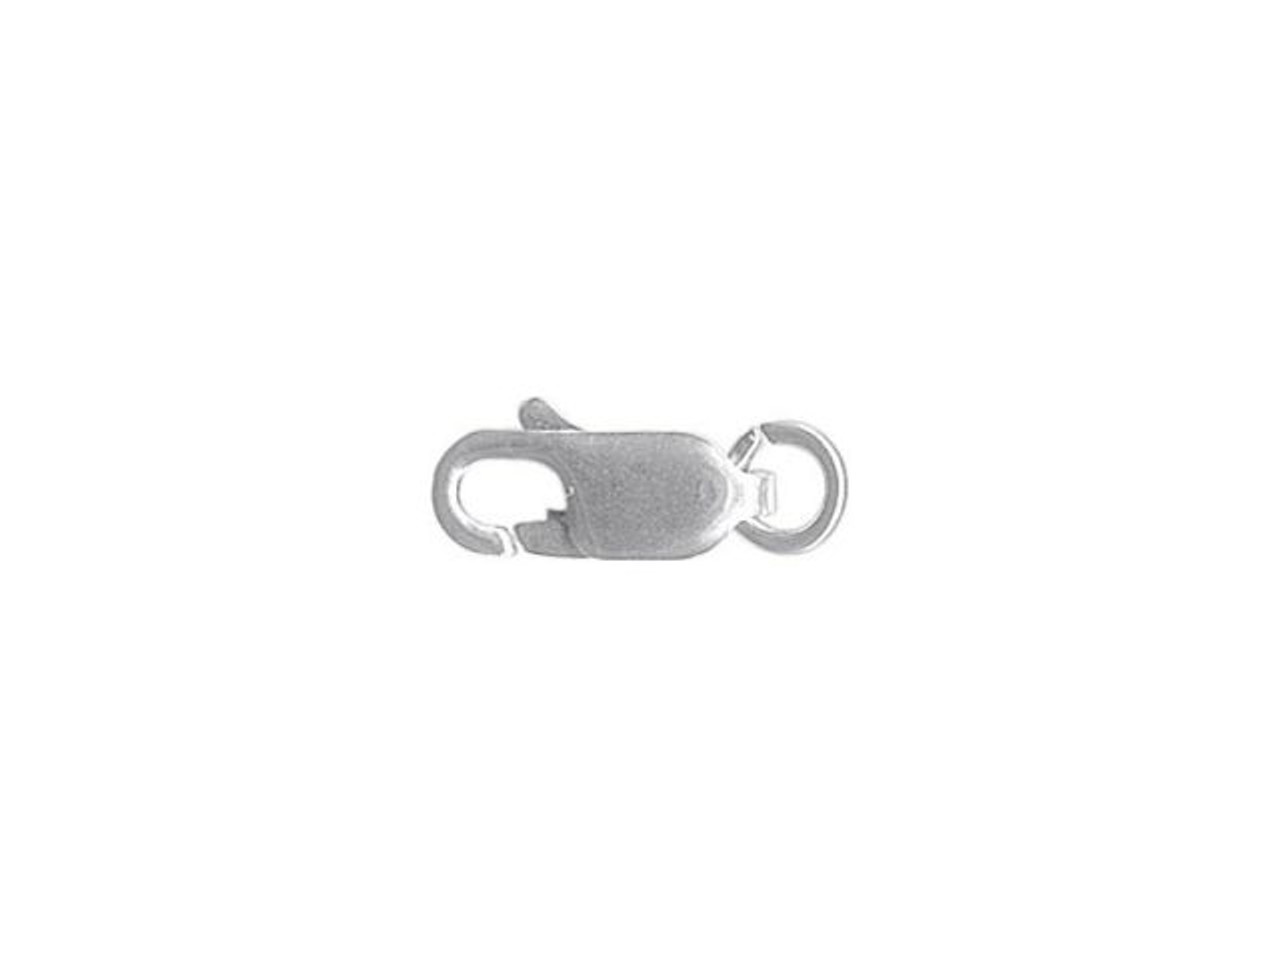 Silver Stainless Steel Lobster Claw Clasps | Hackberry Creek